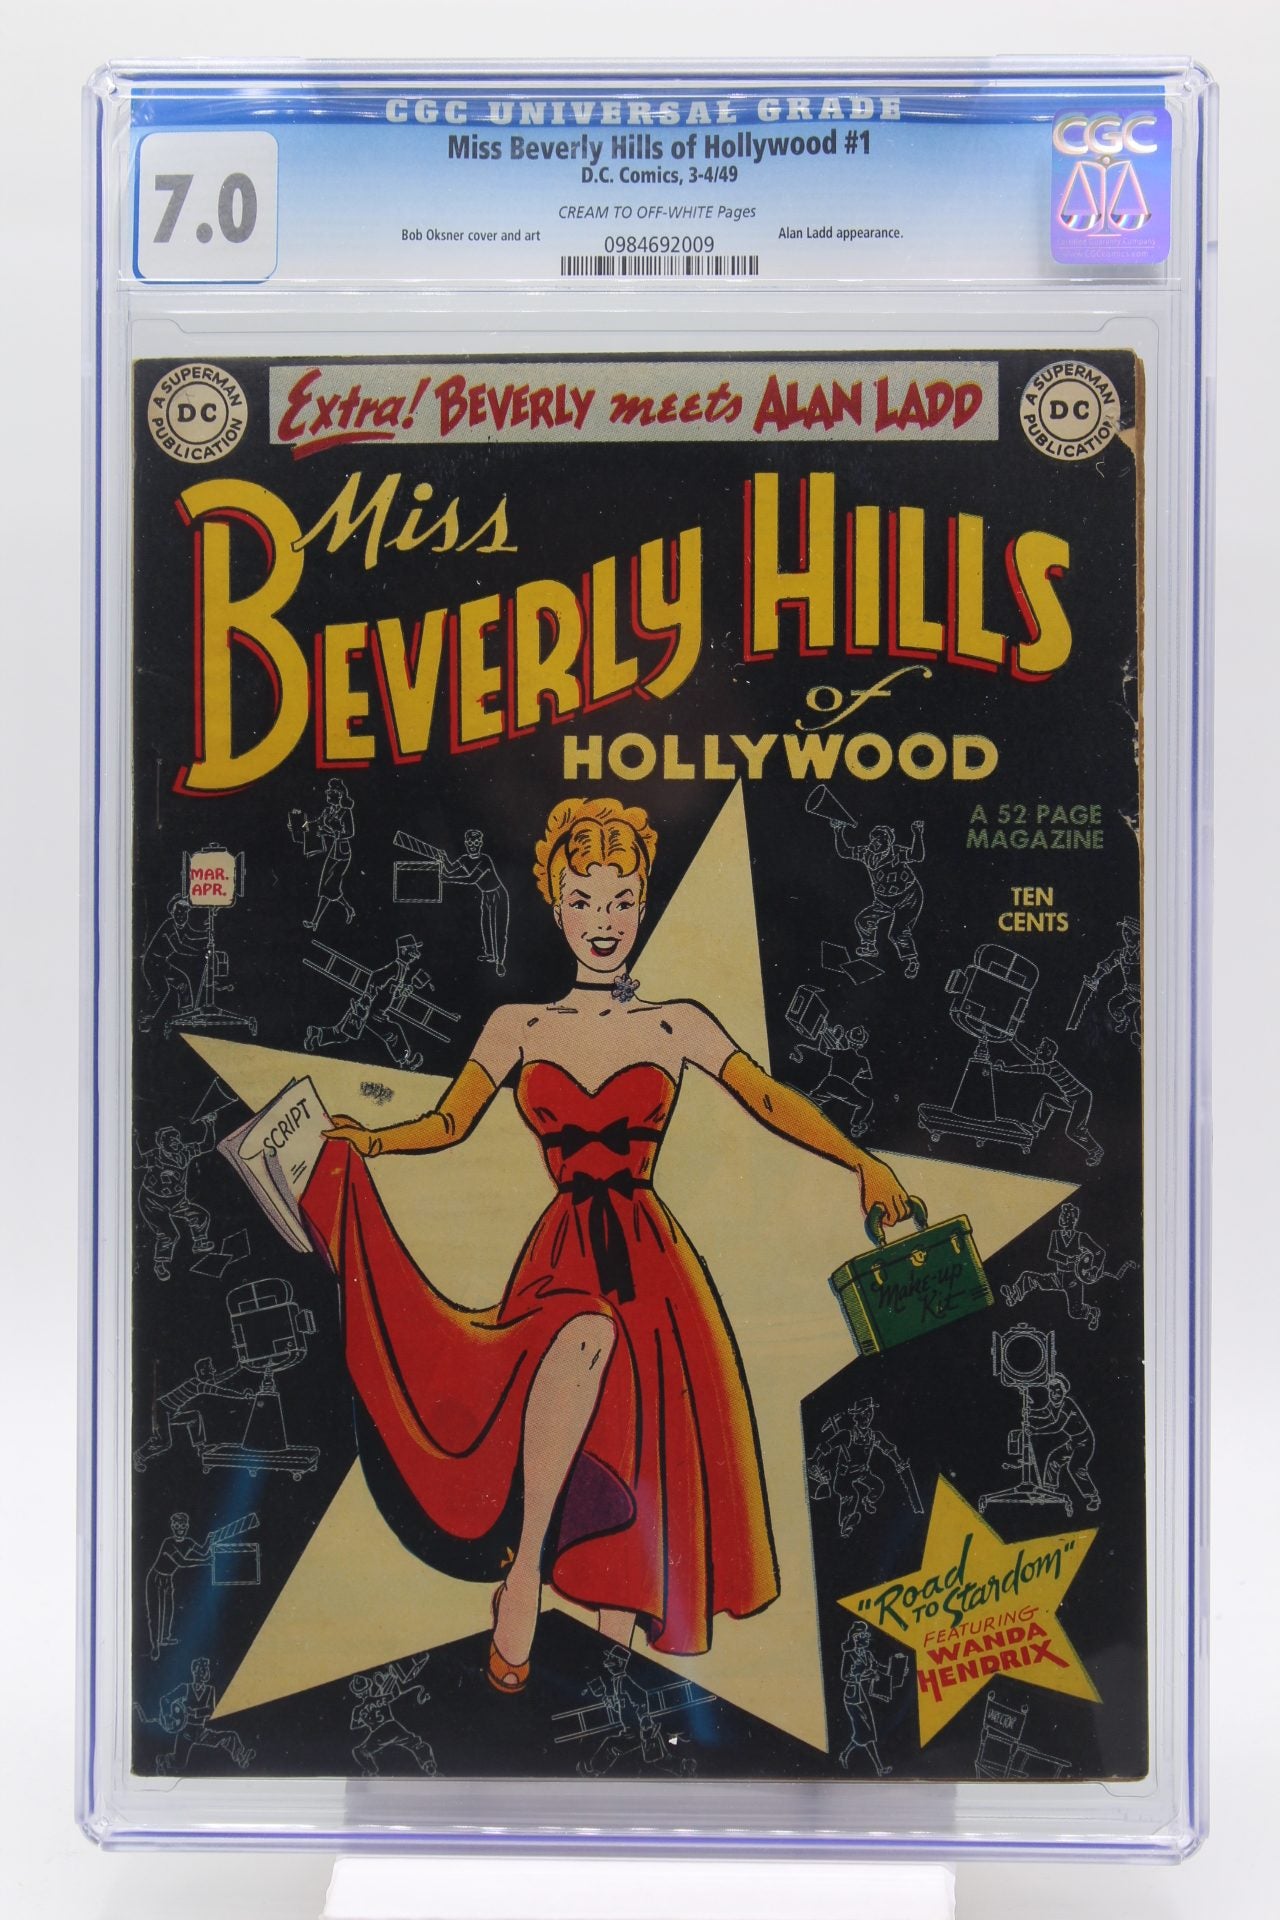 Miss Beverly Hills of Hollywood #1 - CGC 7.0 - Alan Ladd appearance